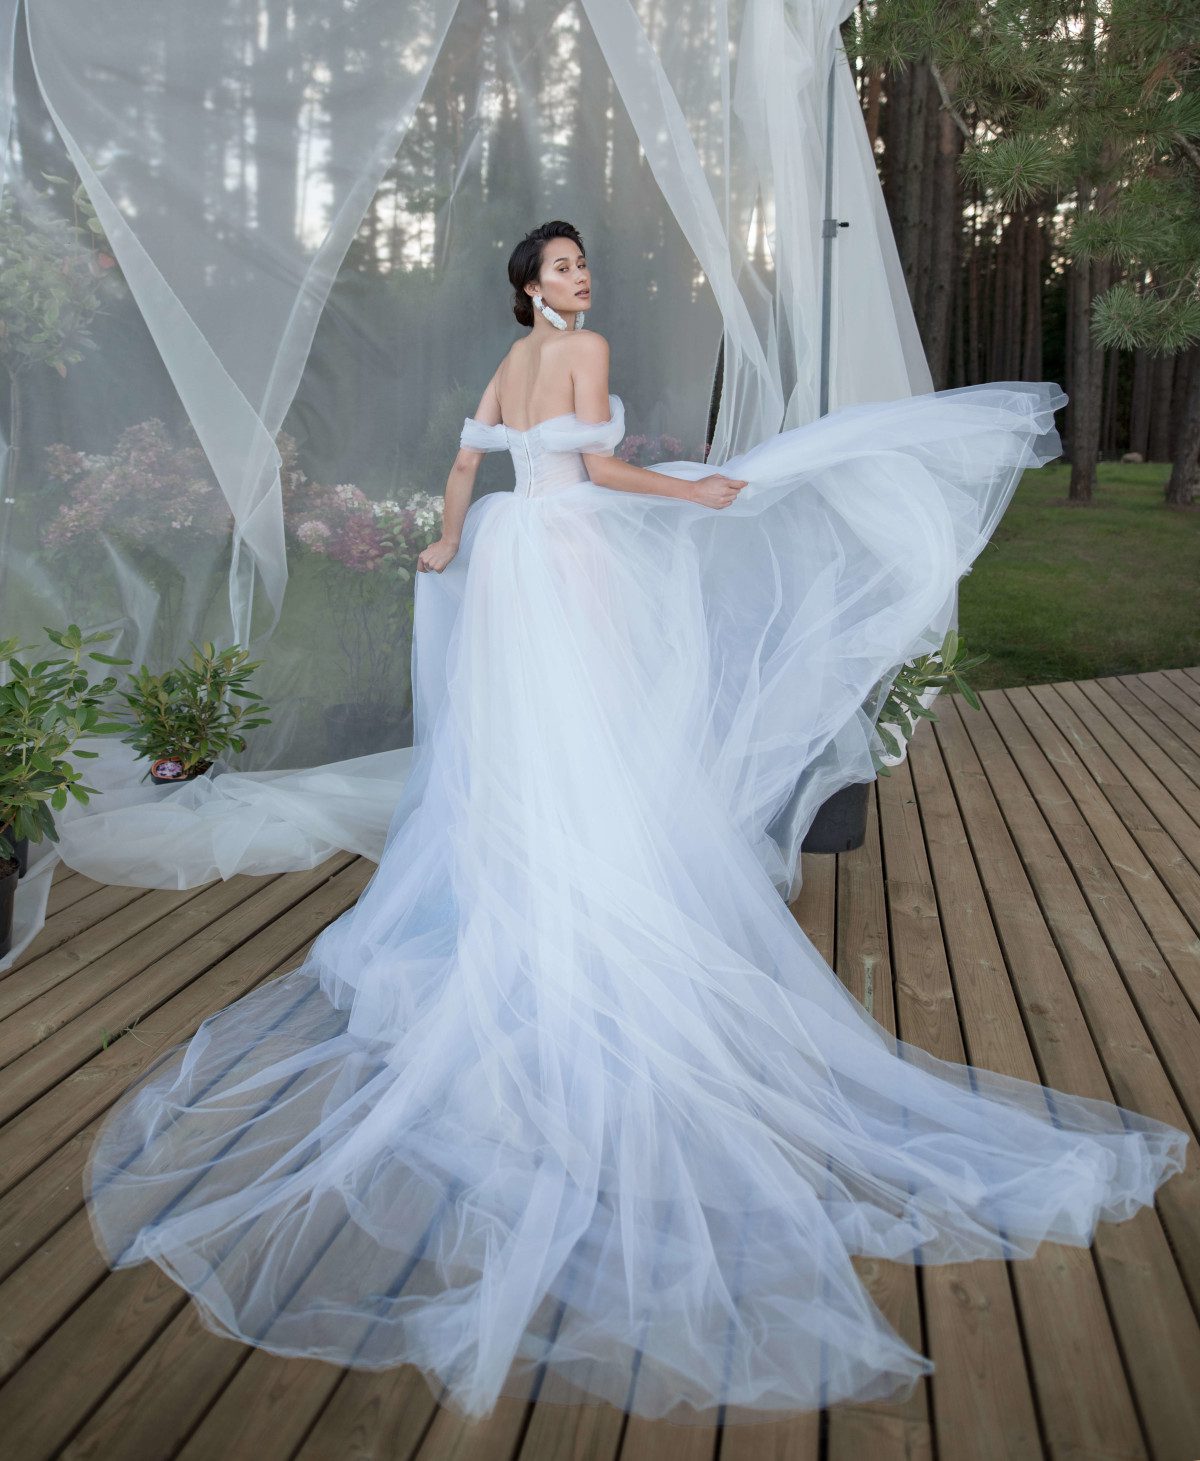 A bride wearing wedding dress with a long train, skirt decorated with lace elements and bodice decorated with beads and stones by Rara Avis at Dell'Amore Bridal, Auckland, NZ. 2